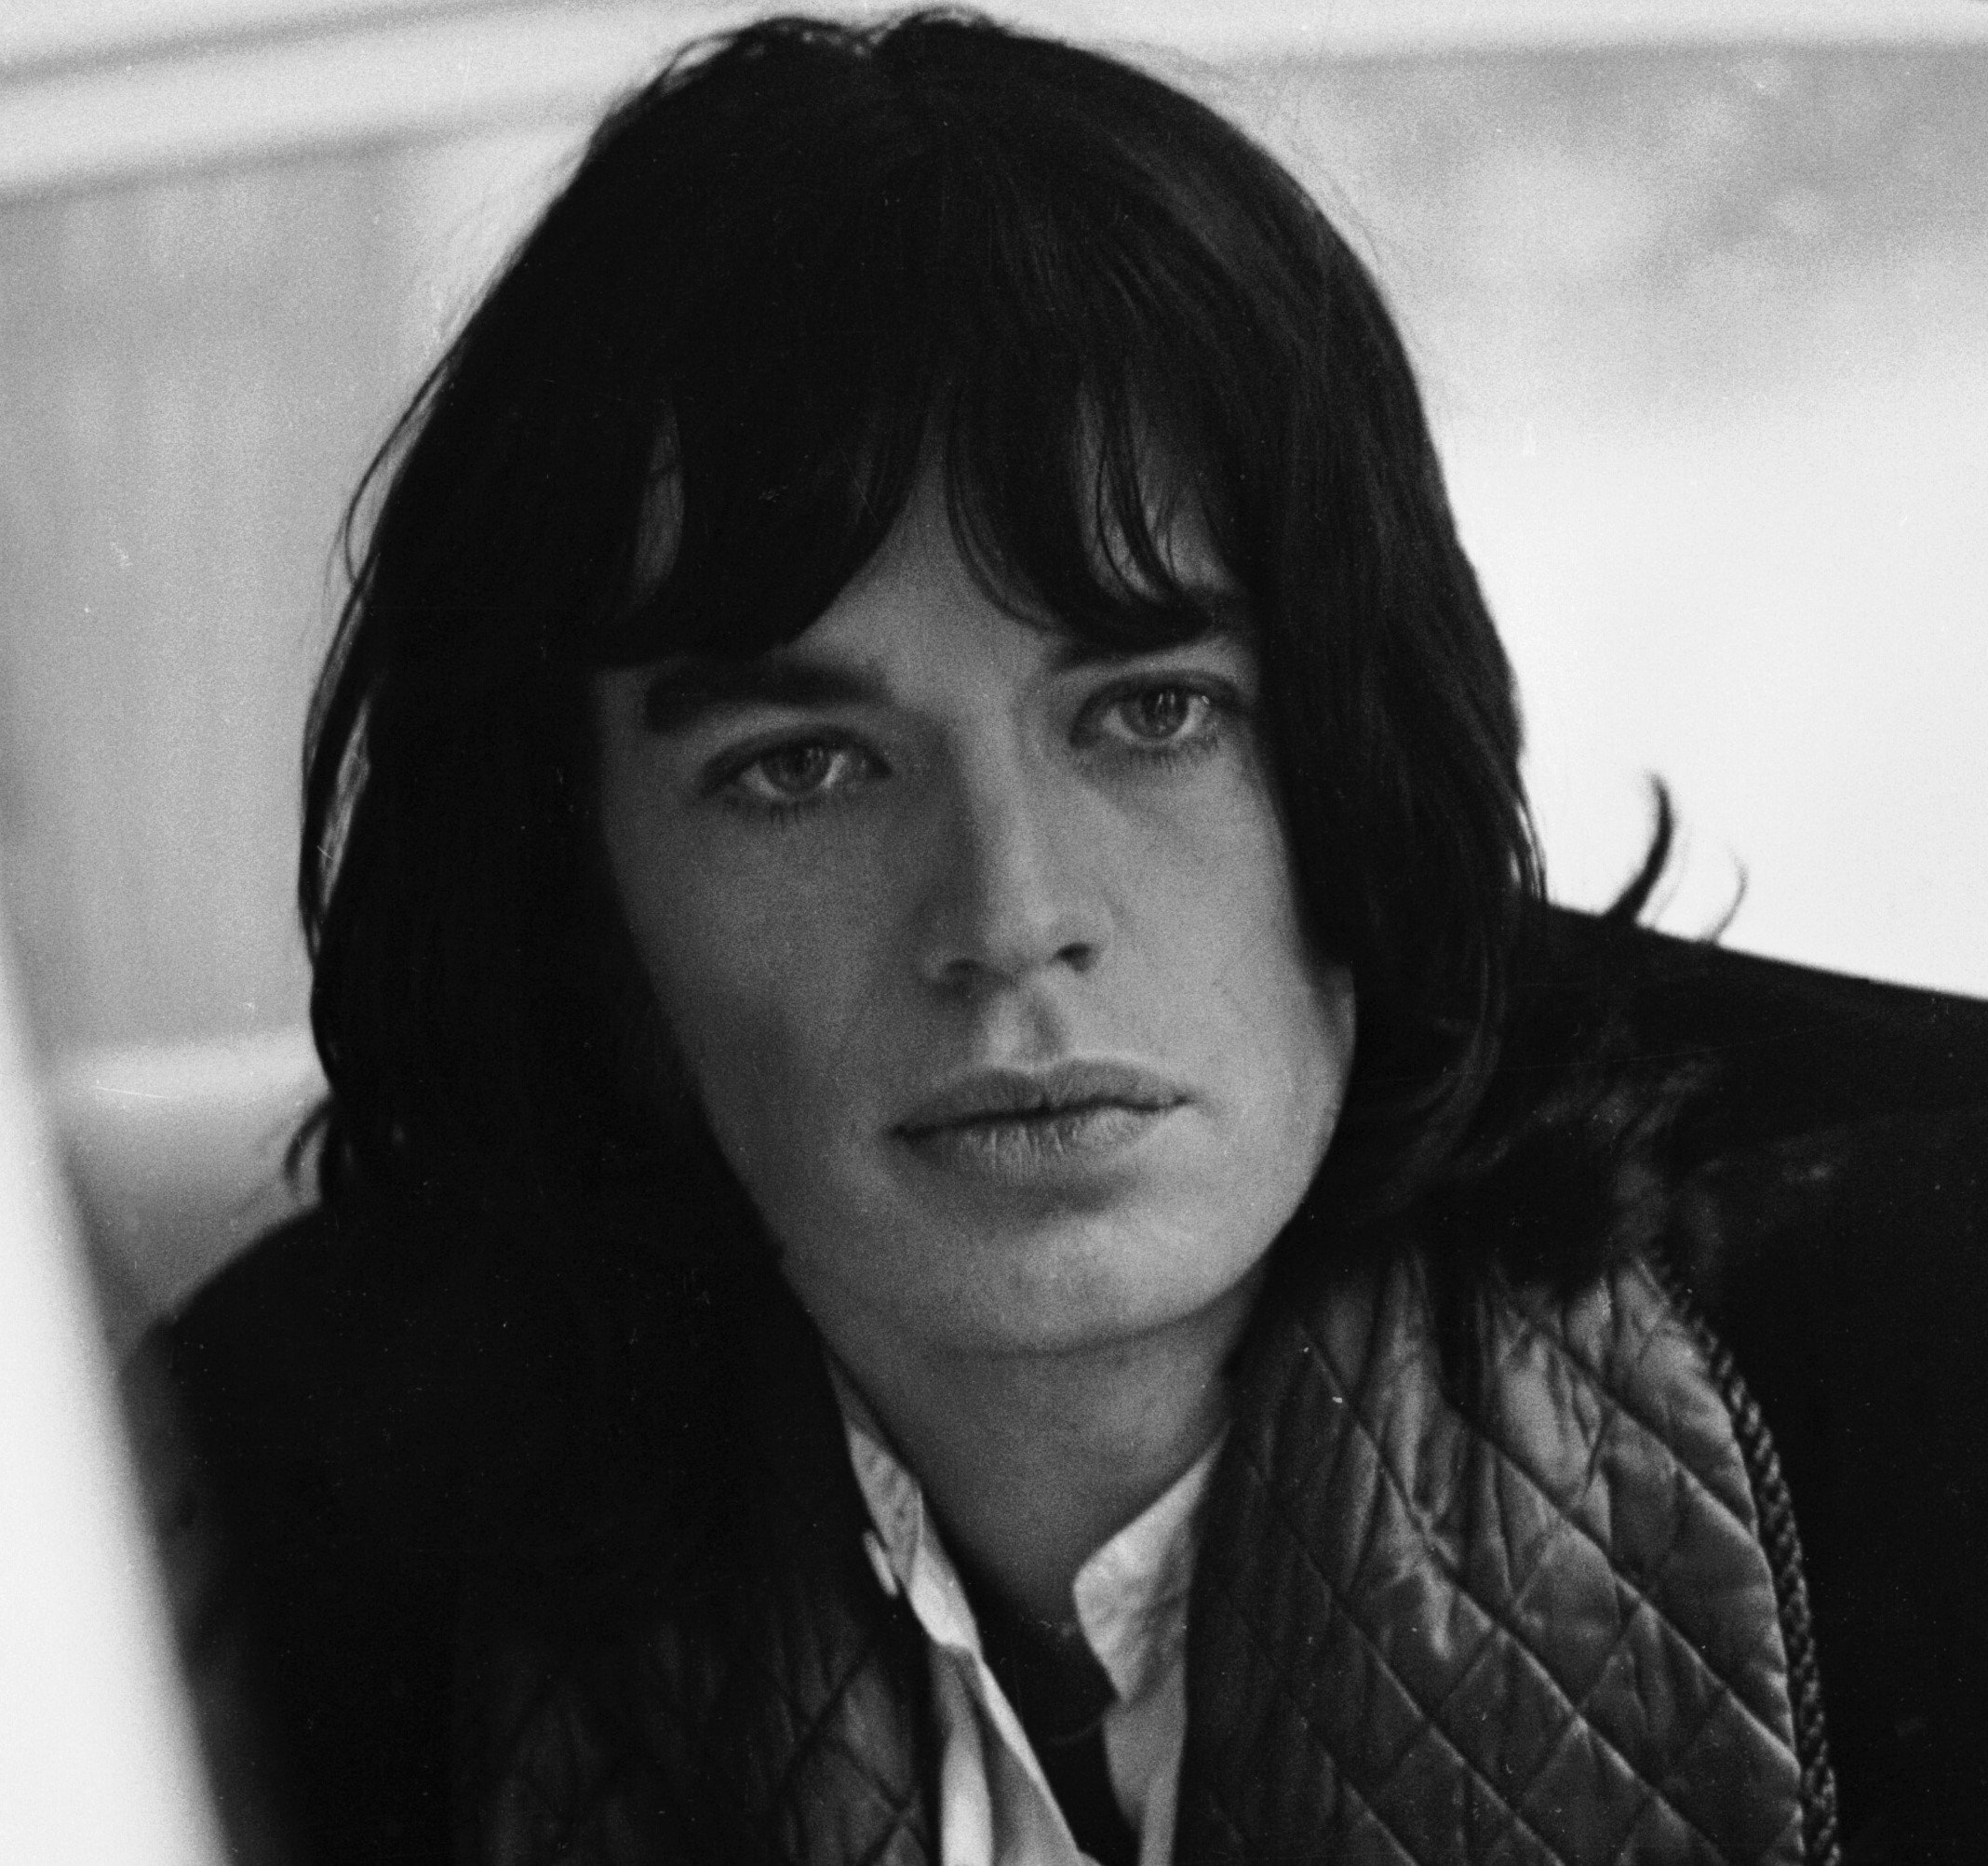 The Rolling Stones' Mick Jagger in black-and-white